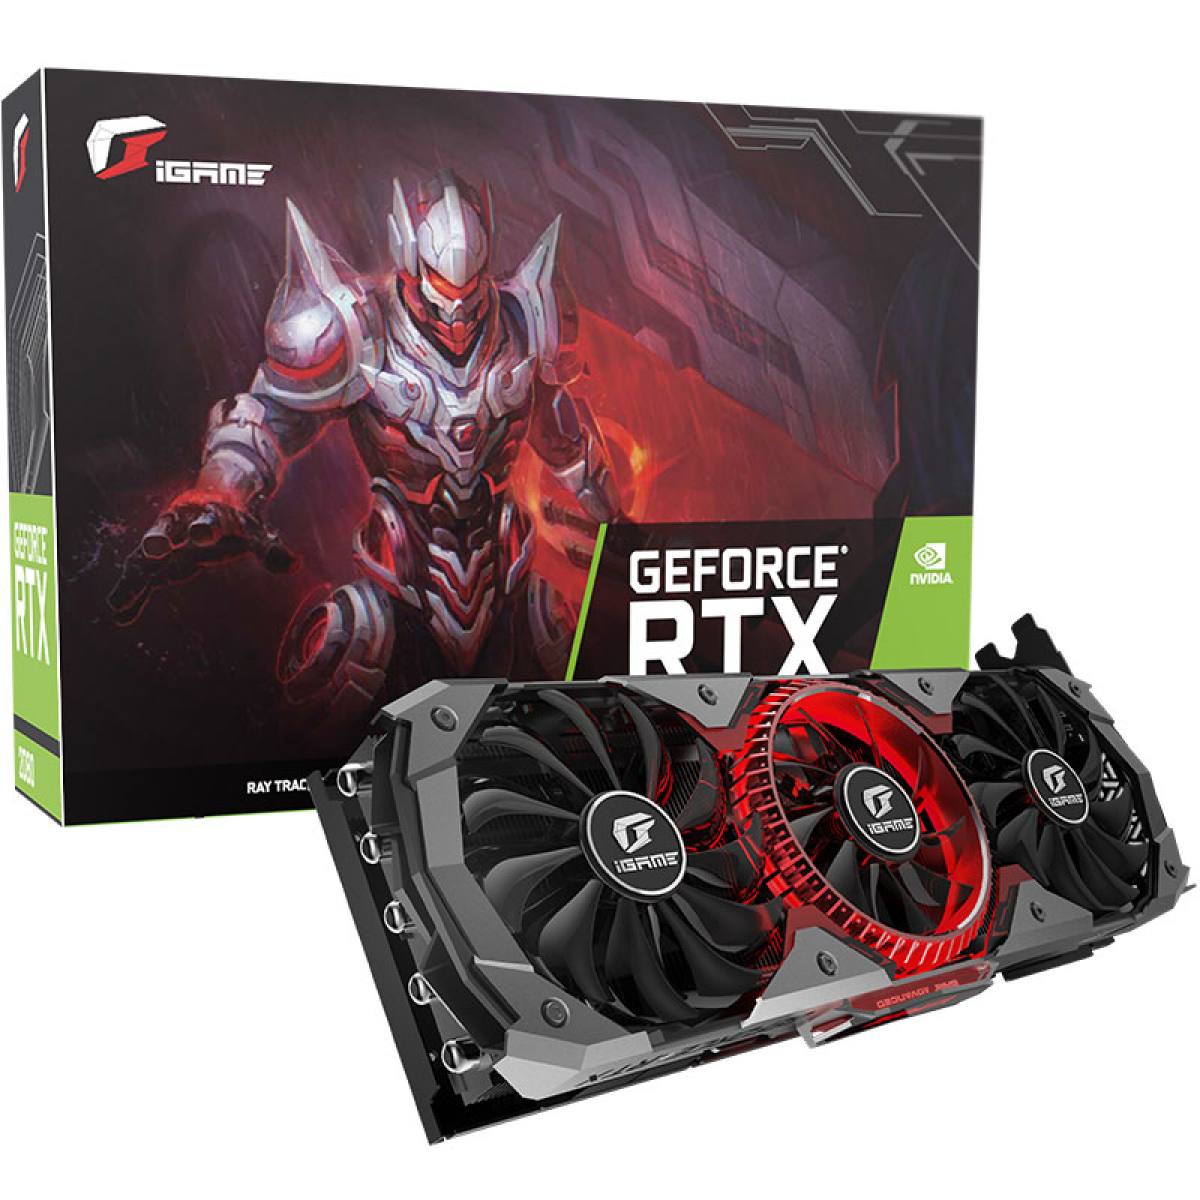 COLORFUL IGAME GEFORCE RTX 2080 ADVANCED OC